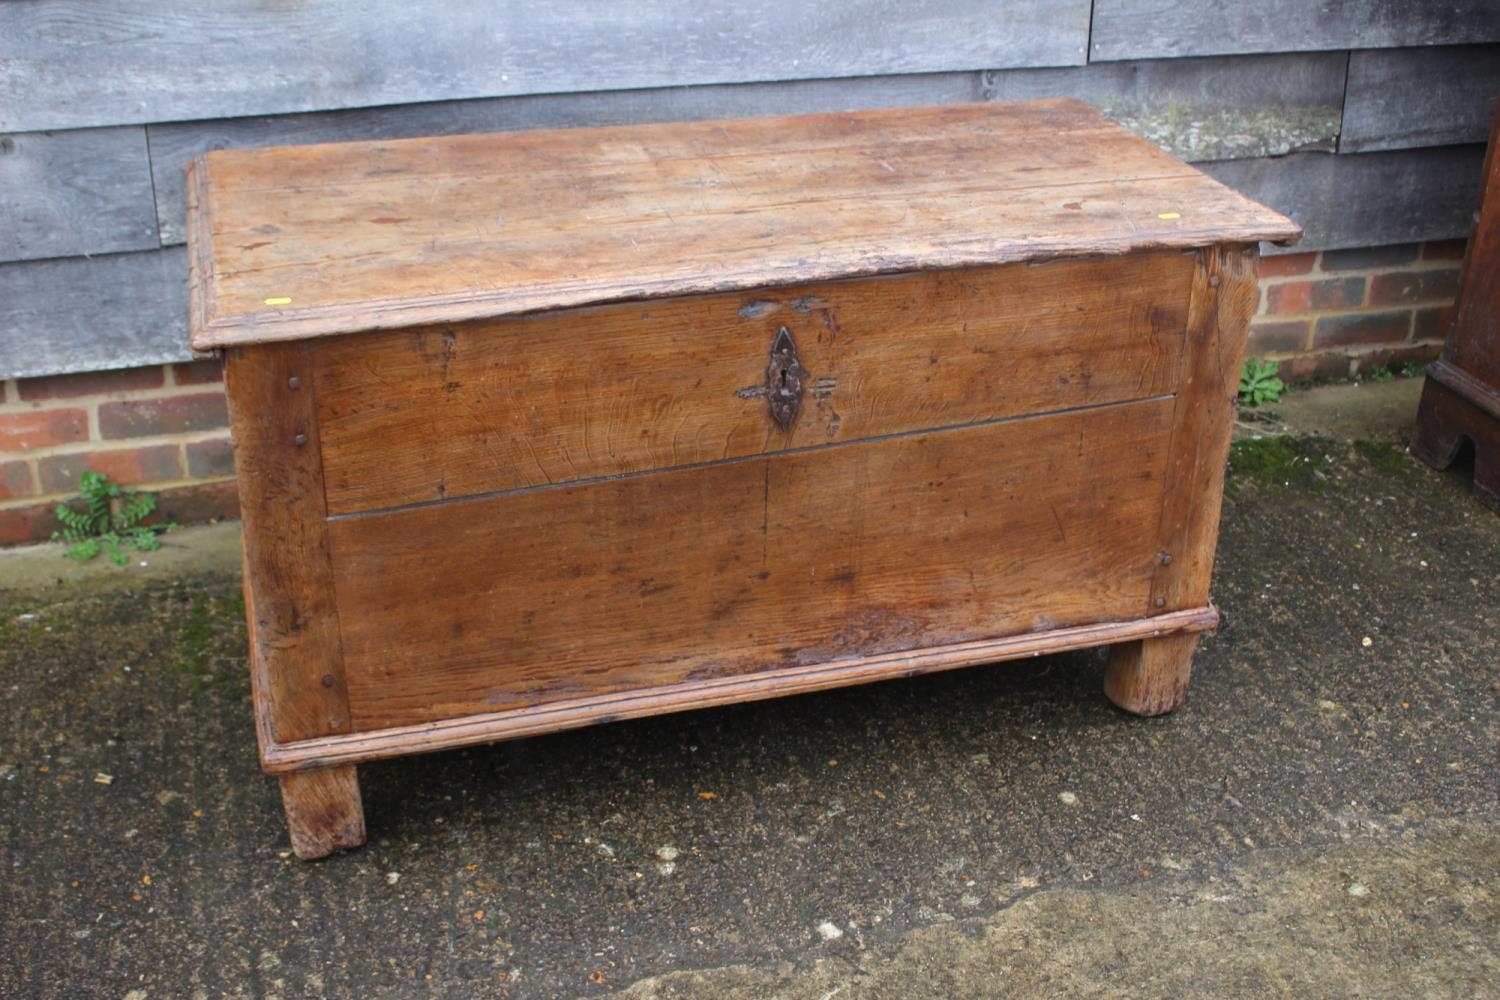 An early 18th century Hanseatic planked oak coffer, the interior fitted candle box, on stile